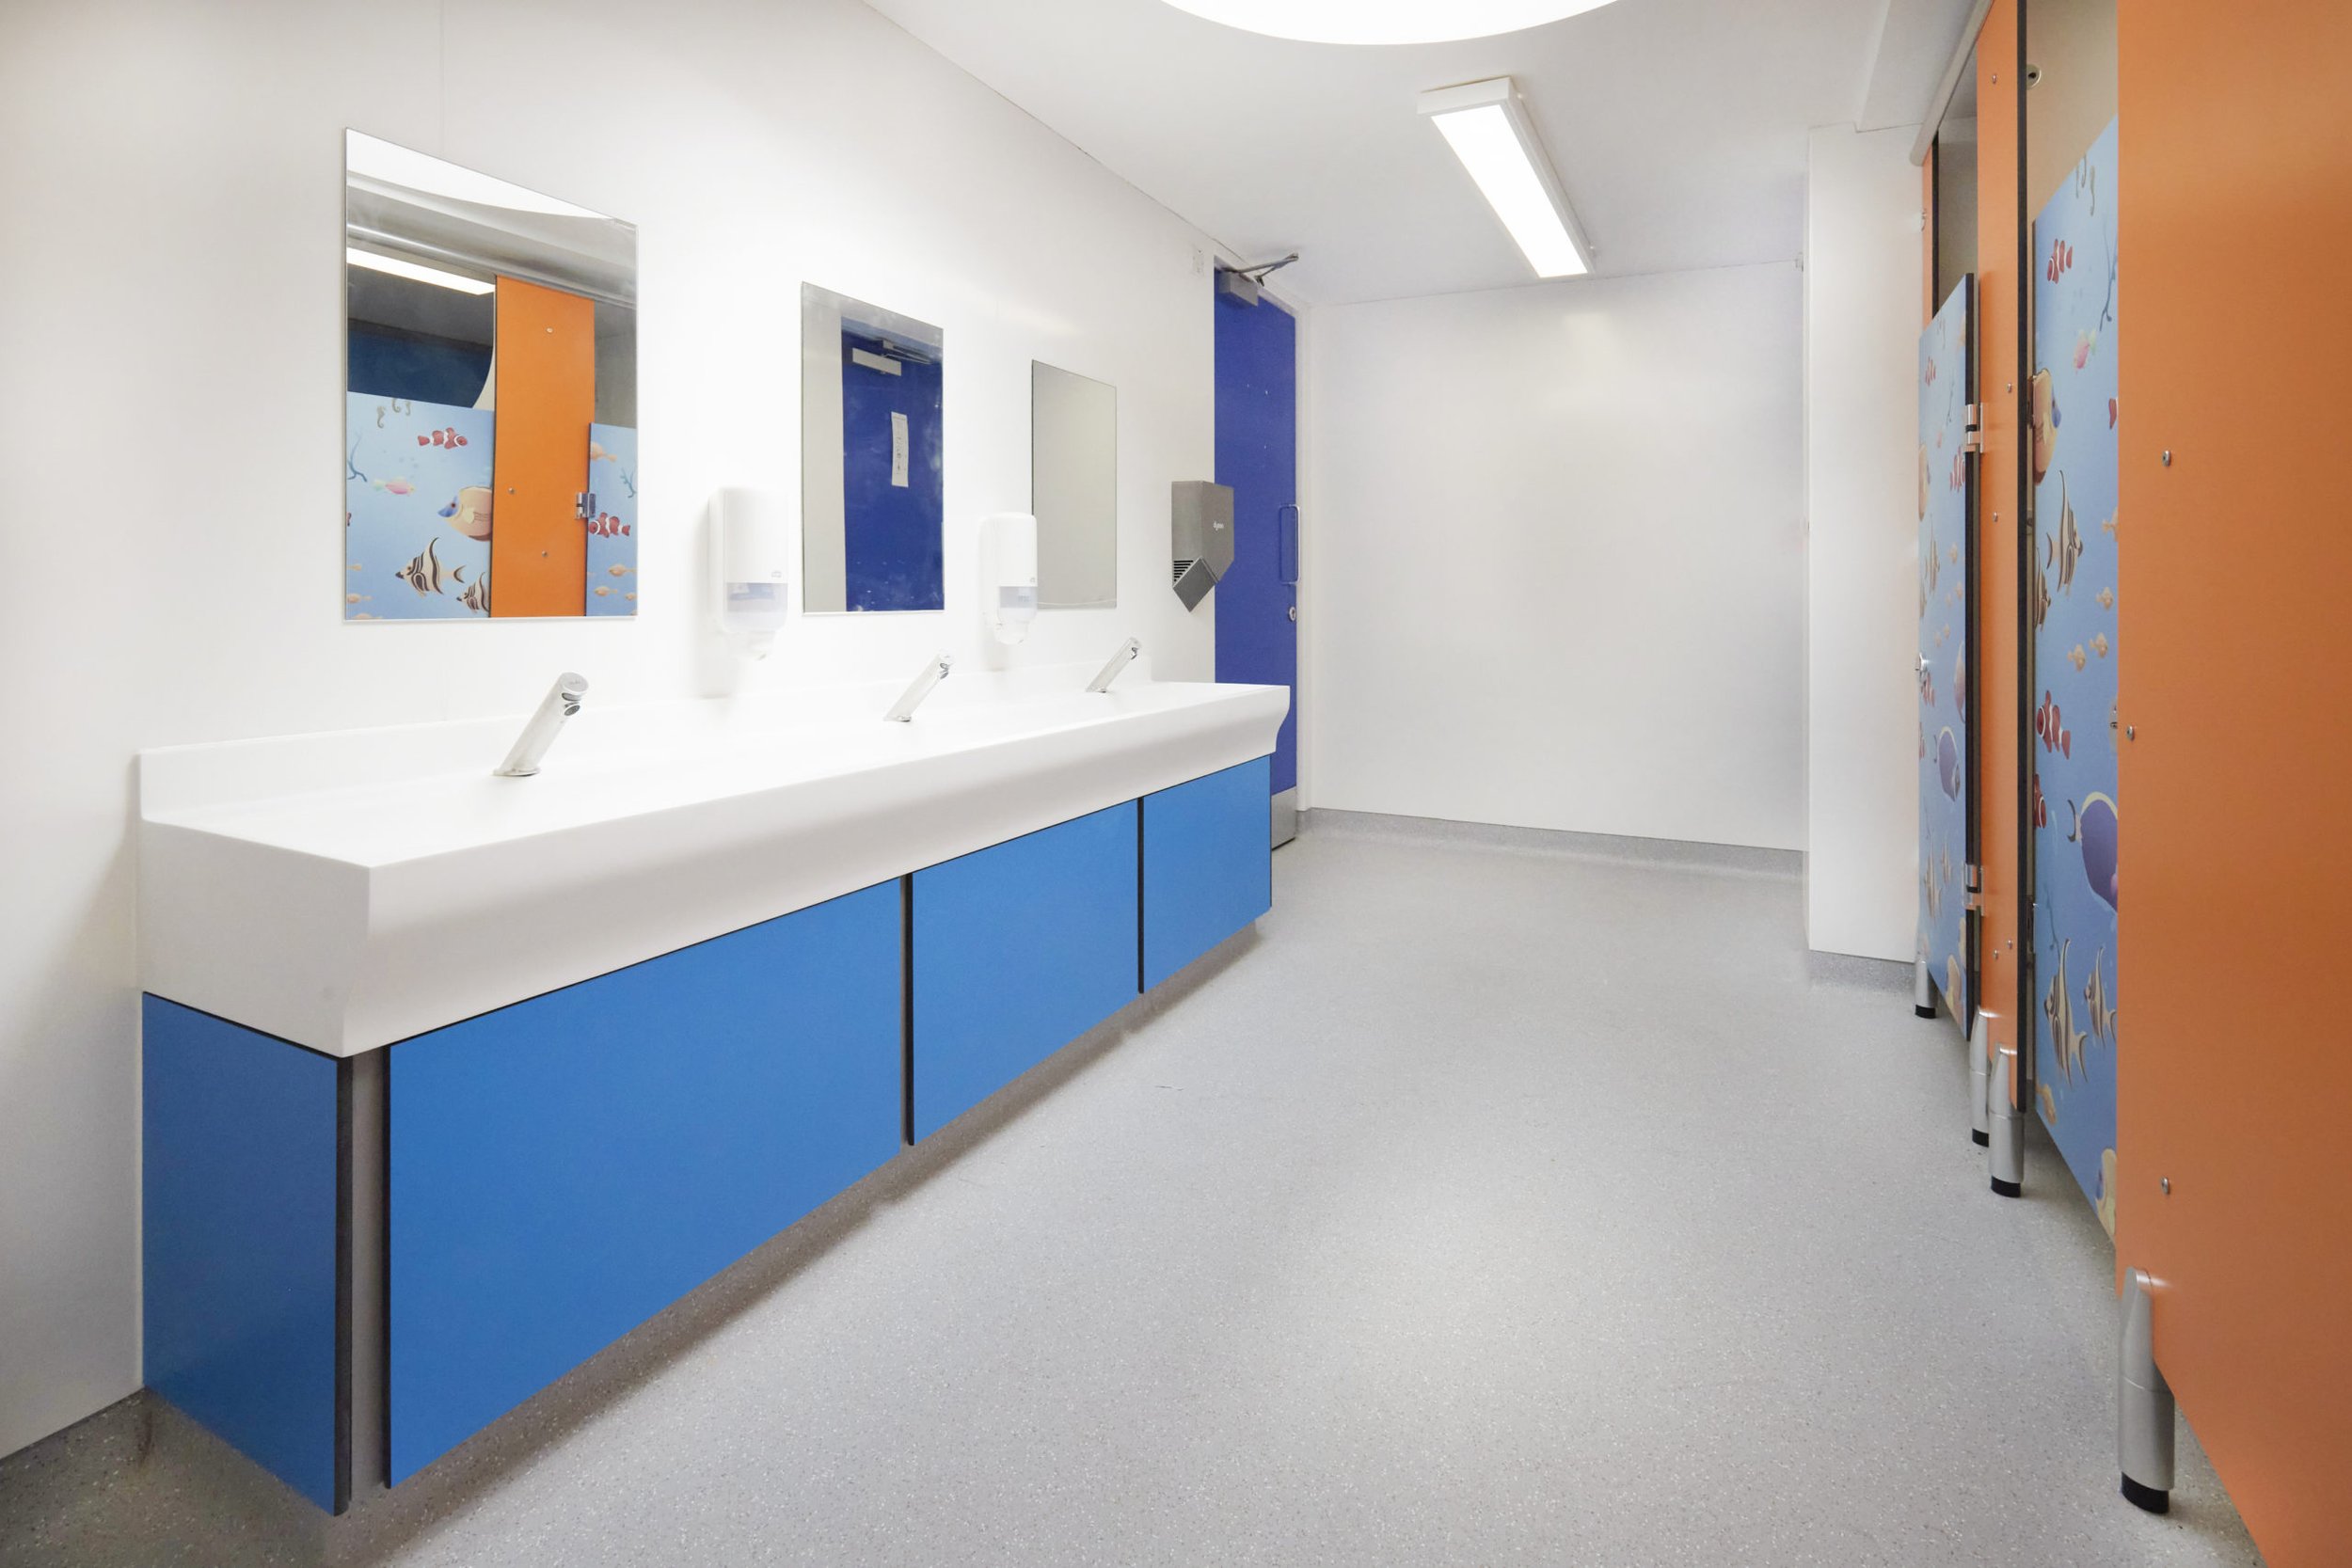 washroom with blue vanity unit and solid surface wash trough and mirrors above at upland school.jpg